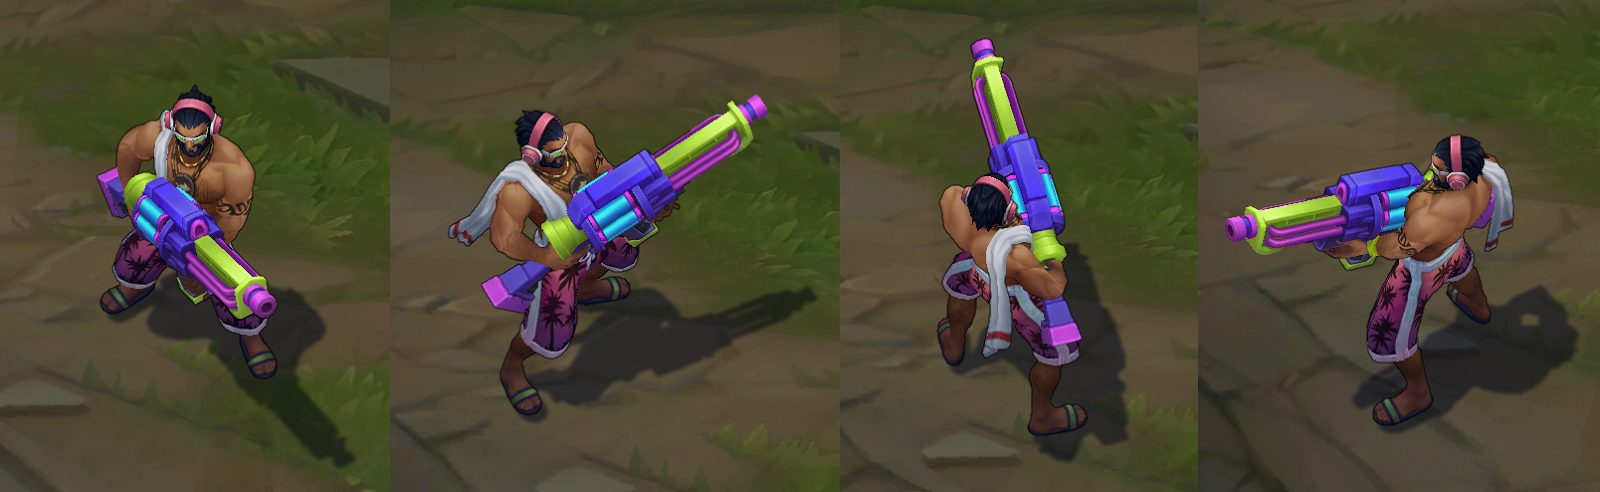 Pool Party Graves chroma skin pack for league of legends ingame picture